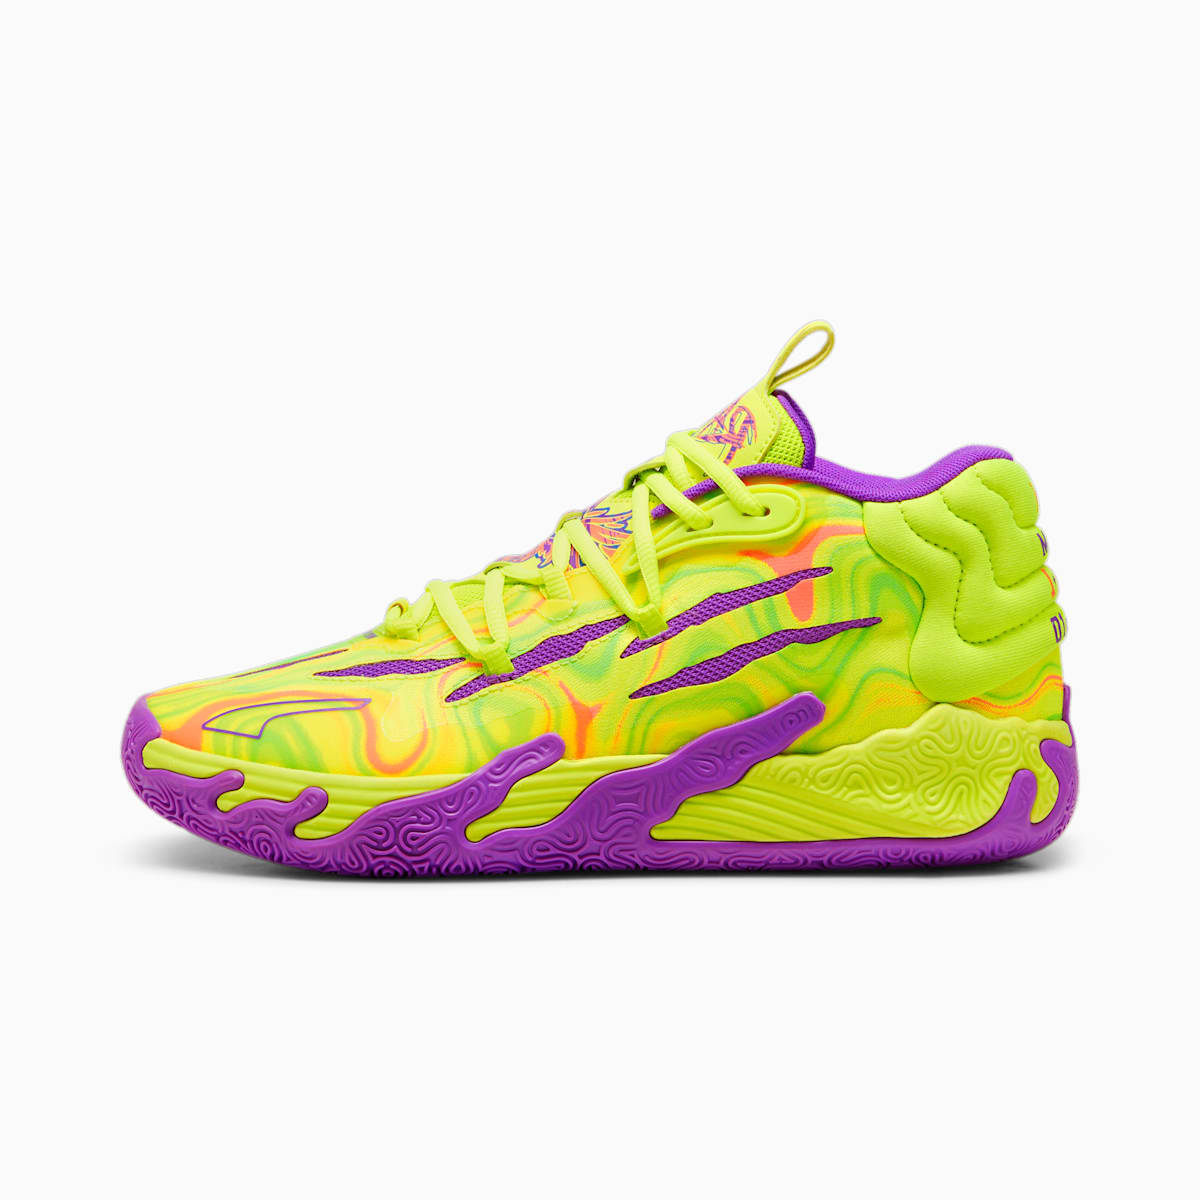 MB.03 Spark Basketball Shoes